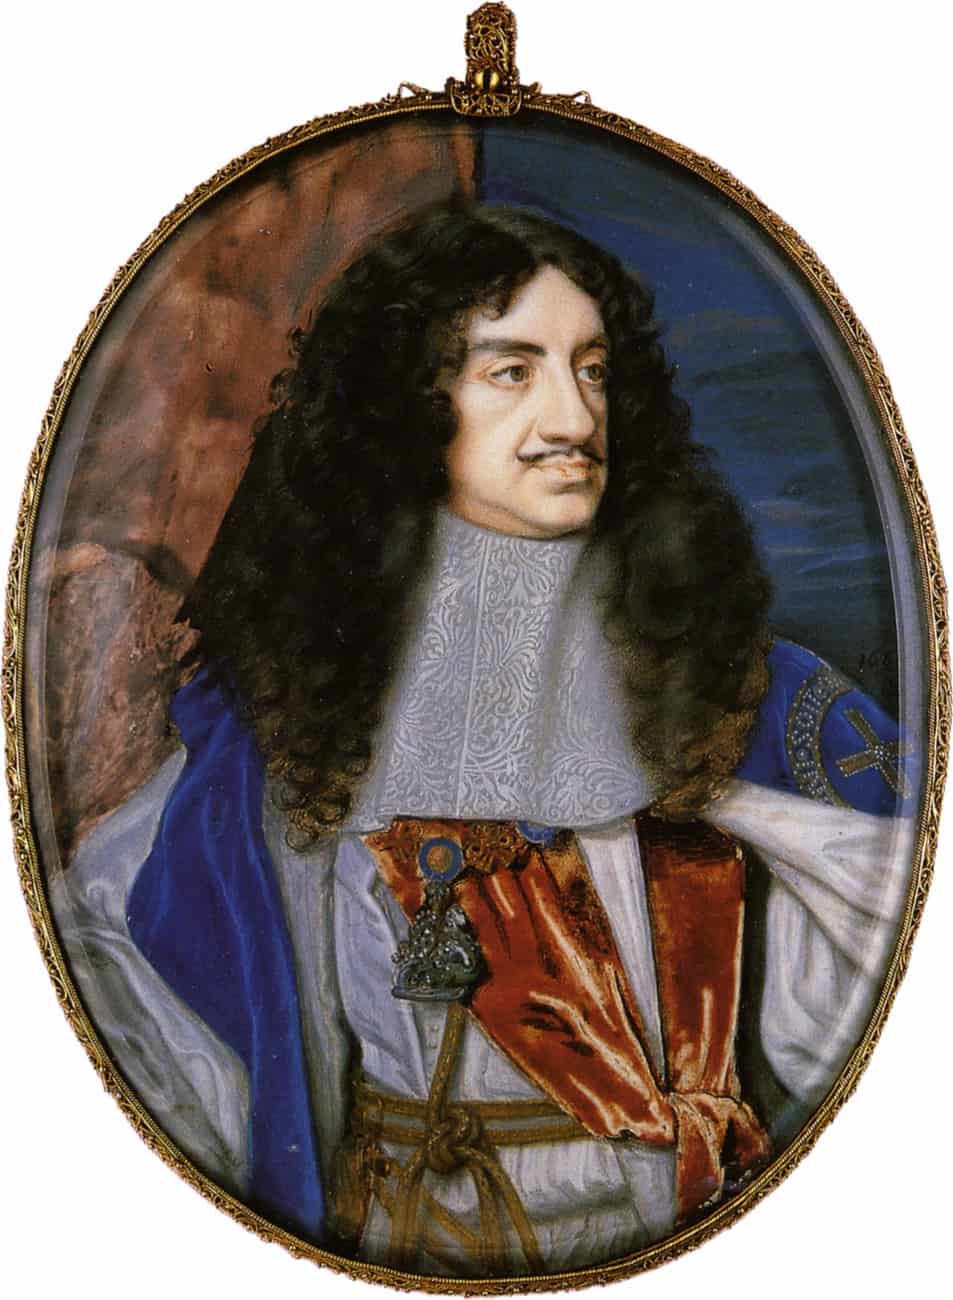 Portrait of Charles II (1630-1685) in royal robes | Samuel Cooper (1609-1672) | 1665 | Royal Picture Gallery Mauritshuis, The Hague, Netherlands